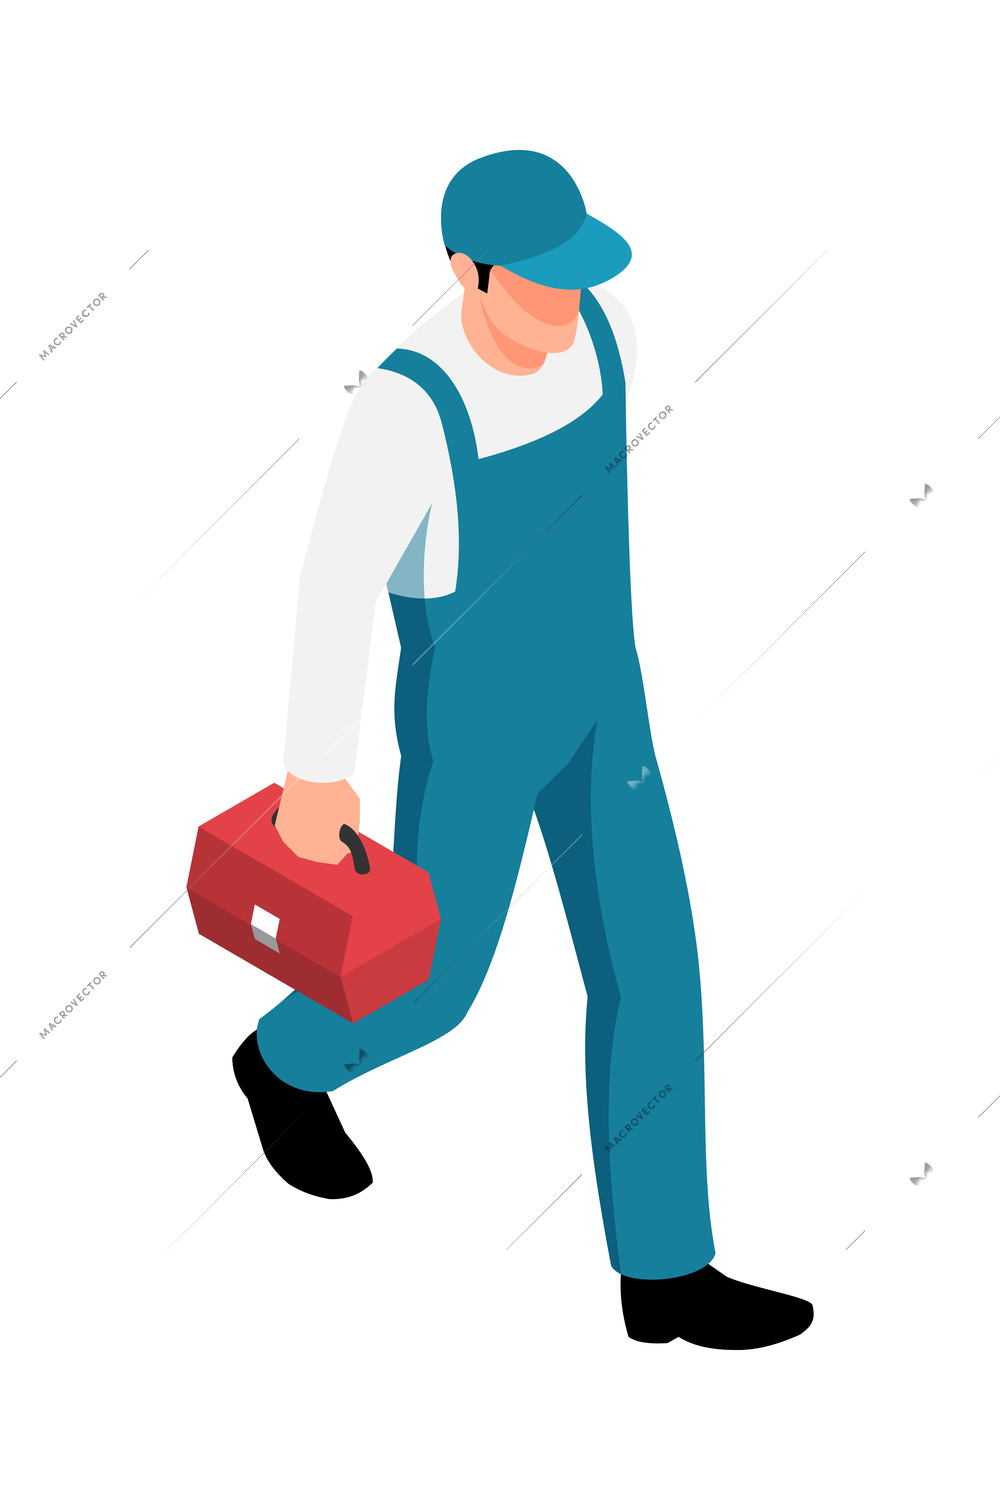 Isometric worker walking with red tool kit 3d vector illustration